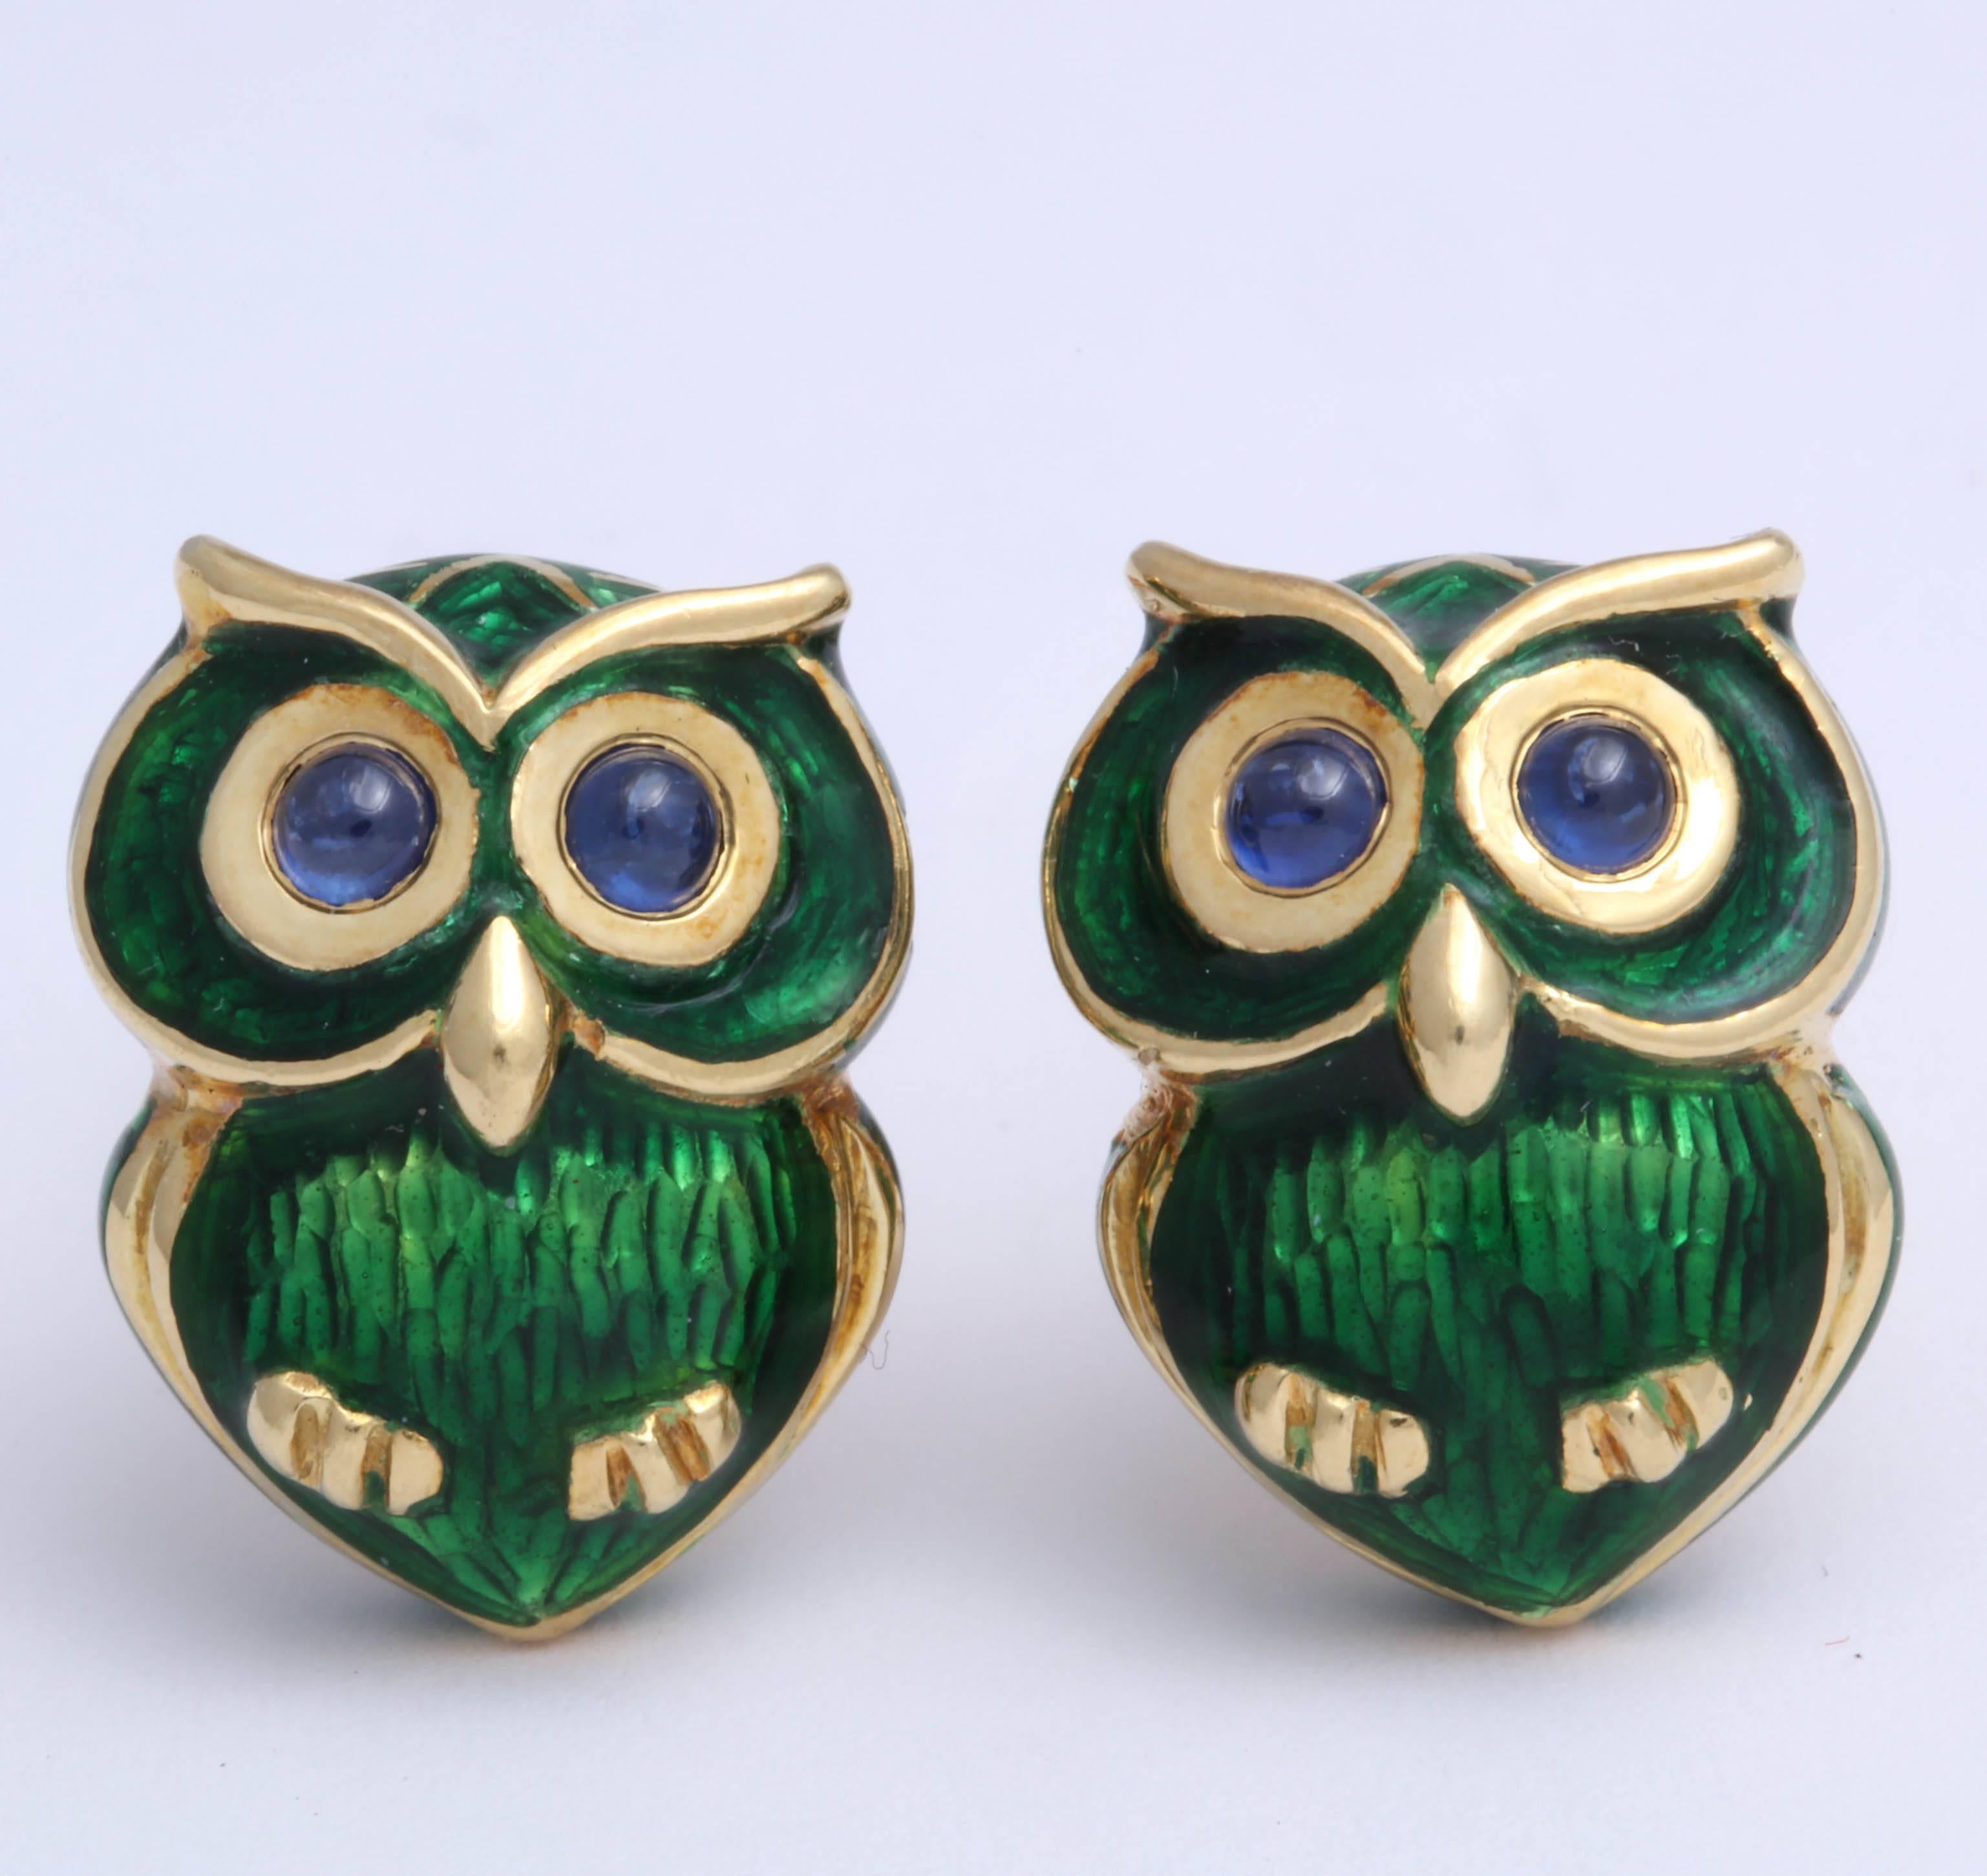 Pair of stylized Owls in 18kt Yellow Gold and Green Enamel with Cabochon Sapphire Eyes - playfully perched  and ready to Fly.
Signed  and marked 750 with an Italian control mark.  Easy to wear Tbar backs.